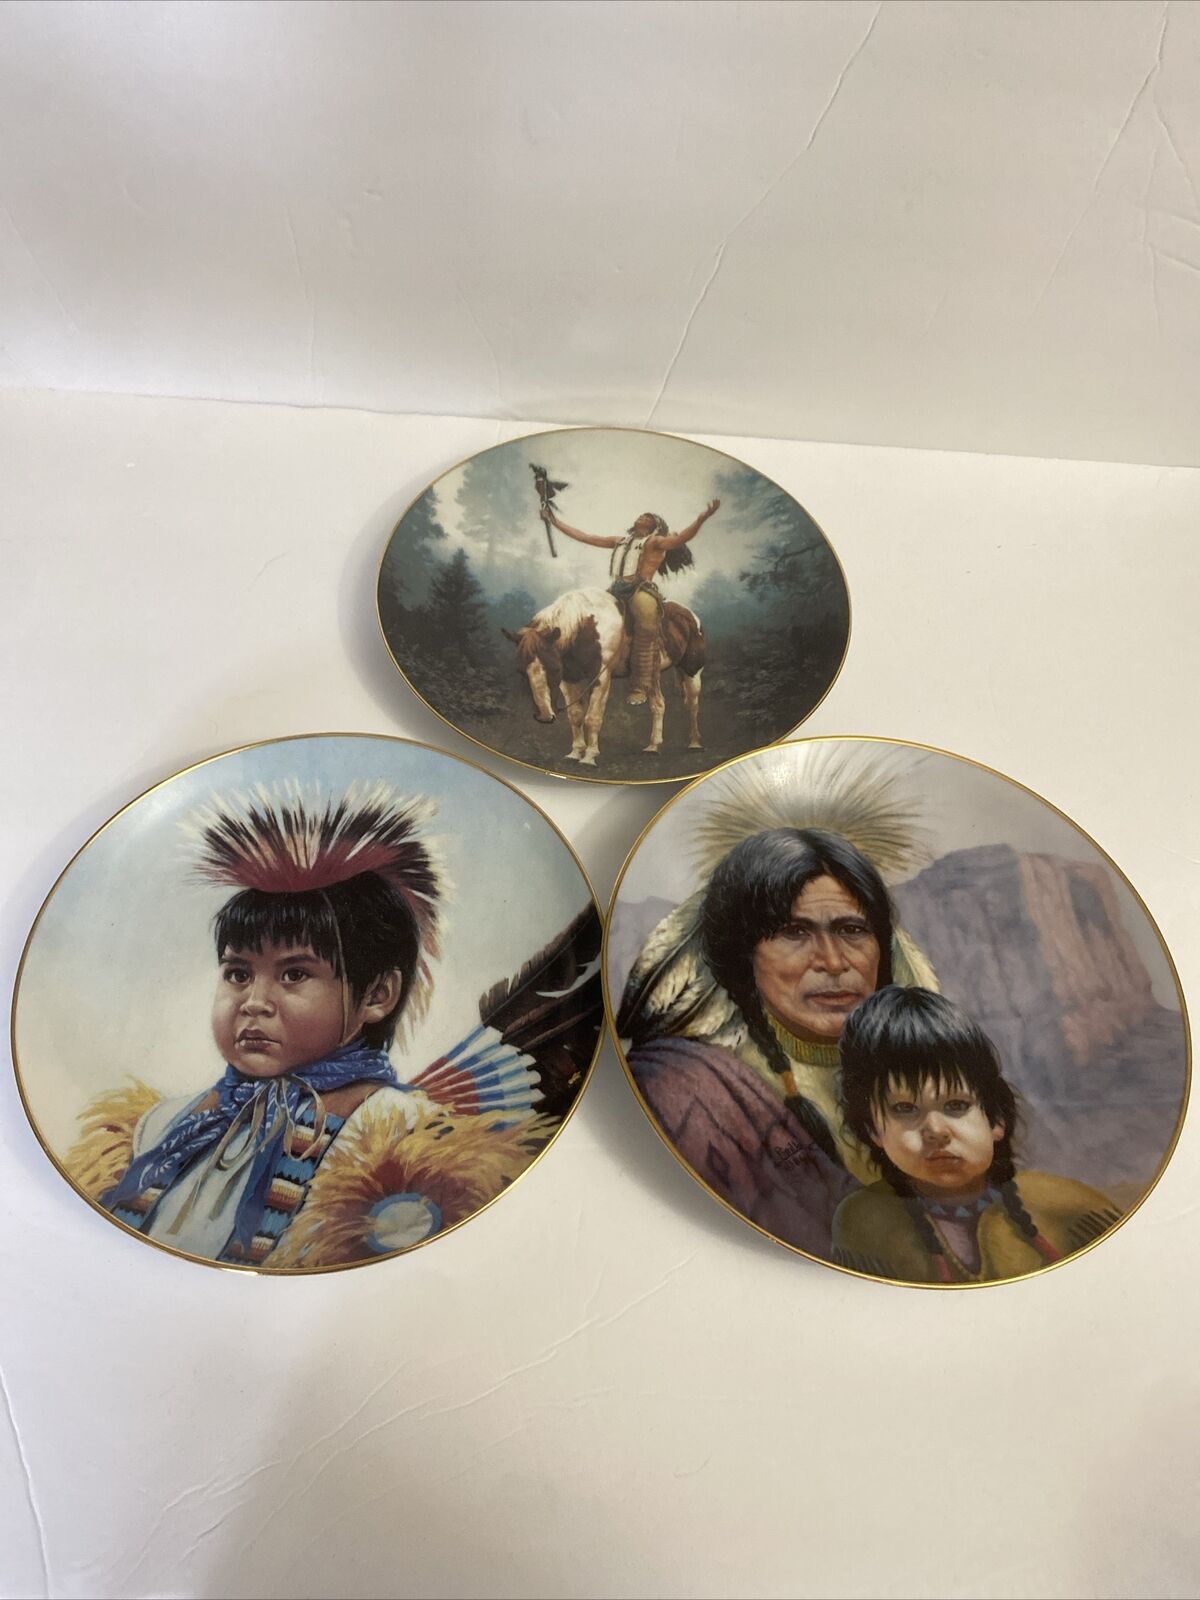 LOT Of 3 Native American Collectibles Vintage Plates.